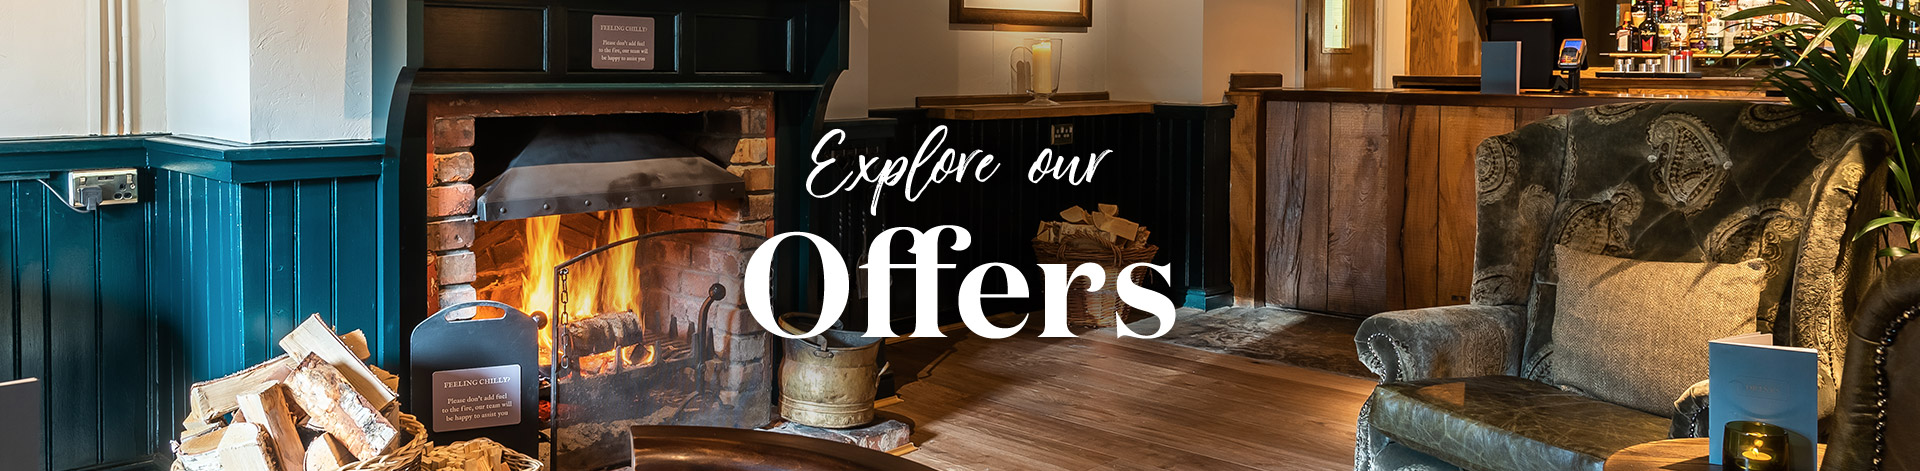 Our latest offers at The Kestrel